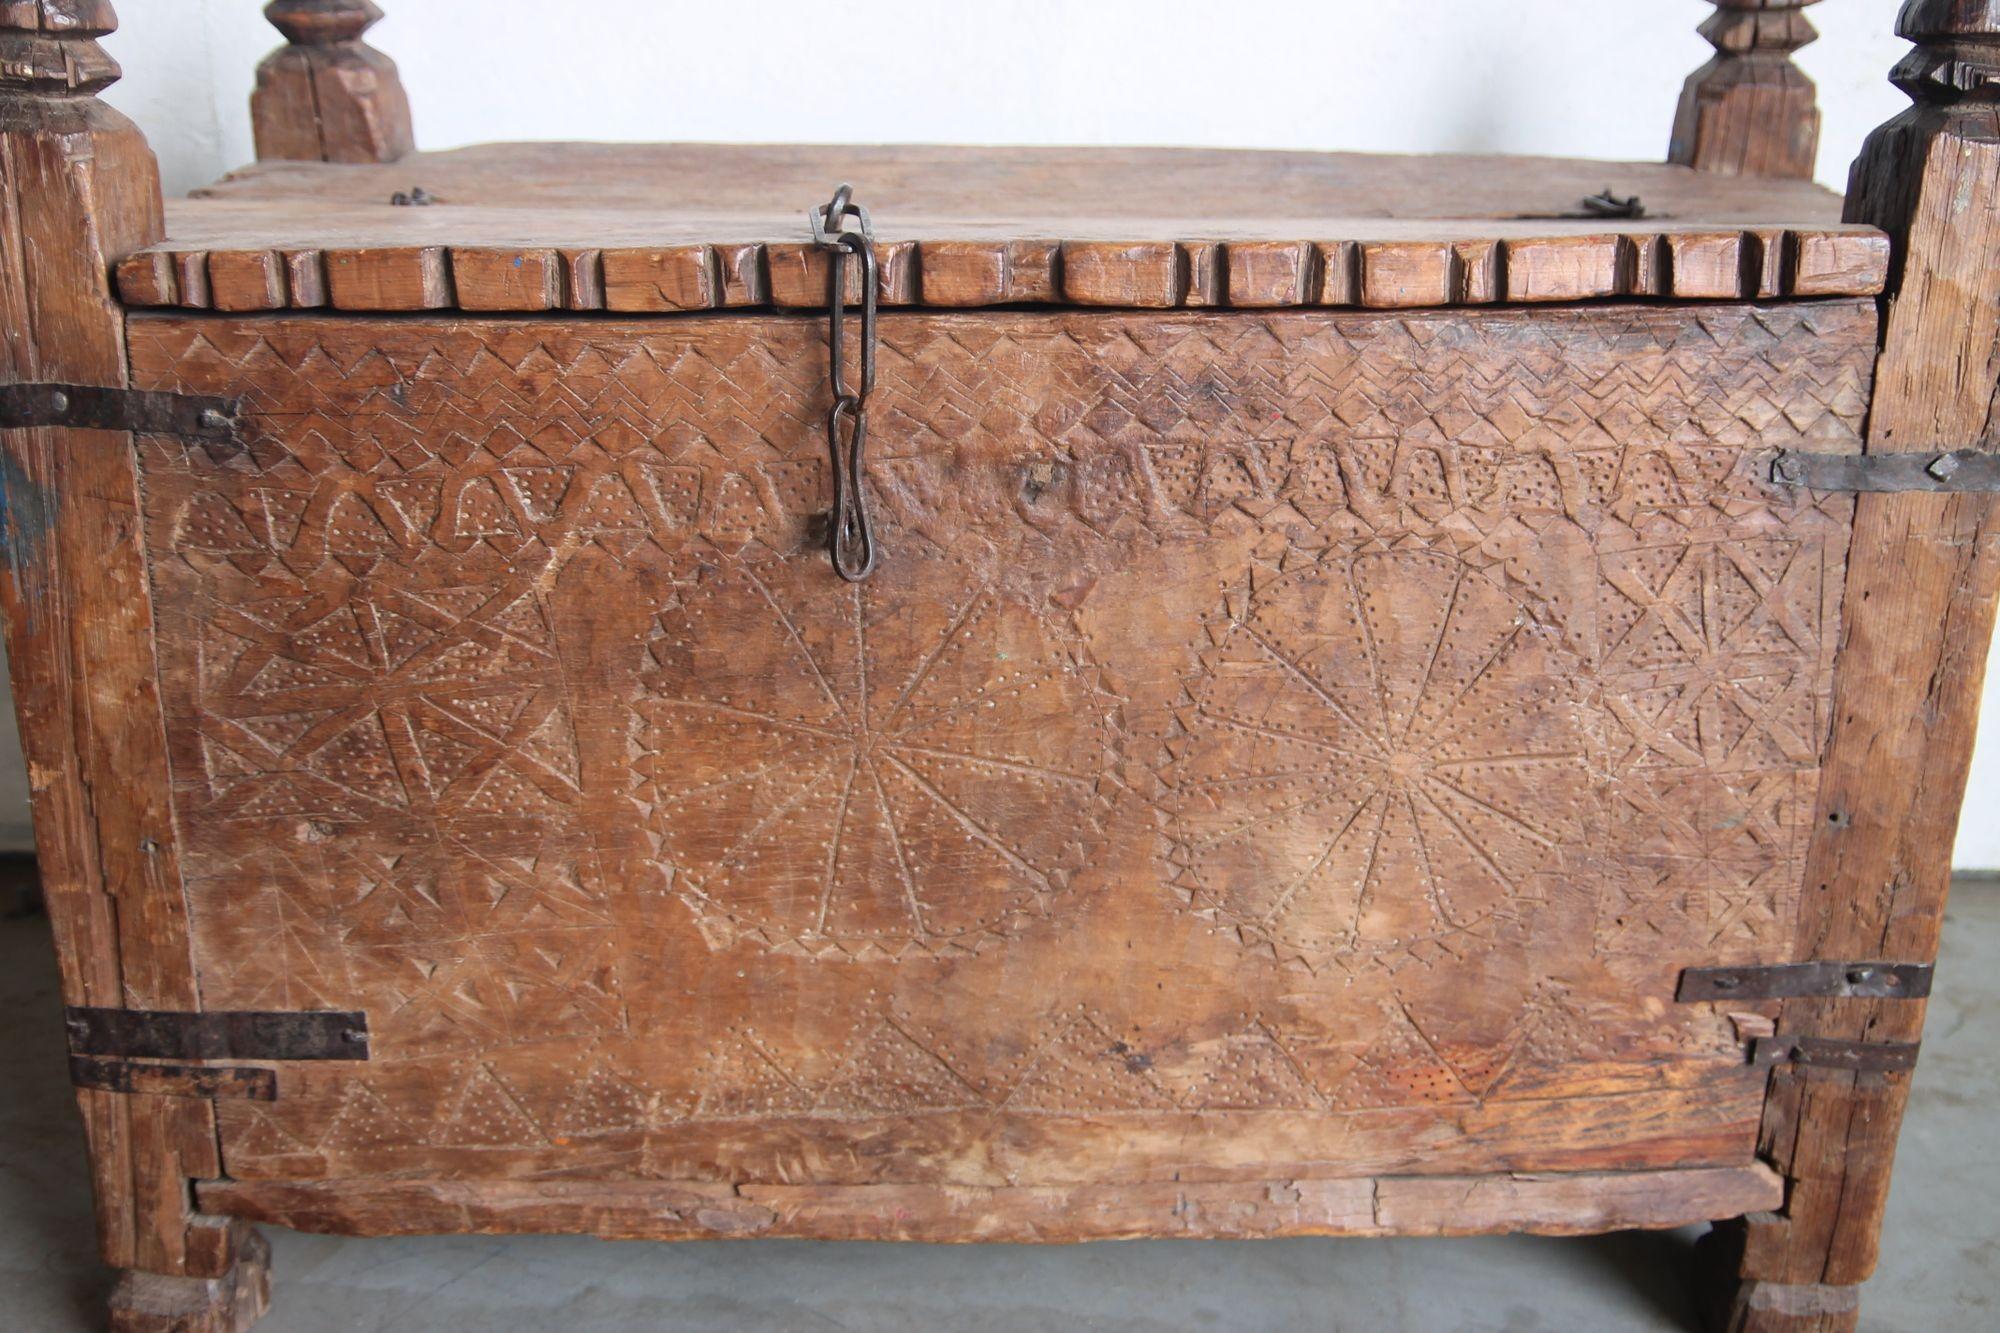 A great vintage hand carved chest from the Swat Valley. This turn of the century piece has carved symbols in the front and still retains its original chain lock and hinges.